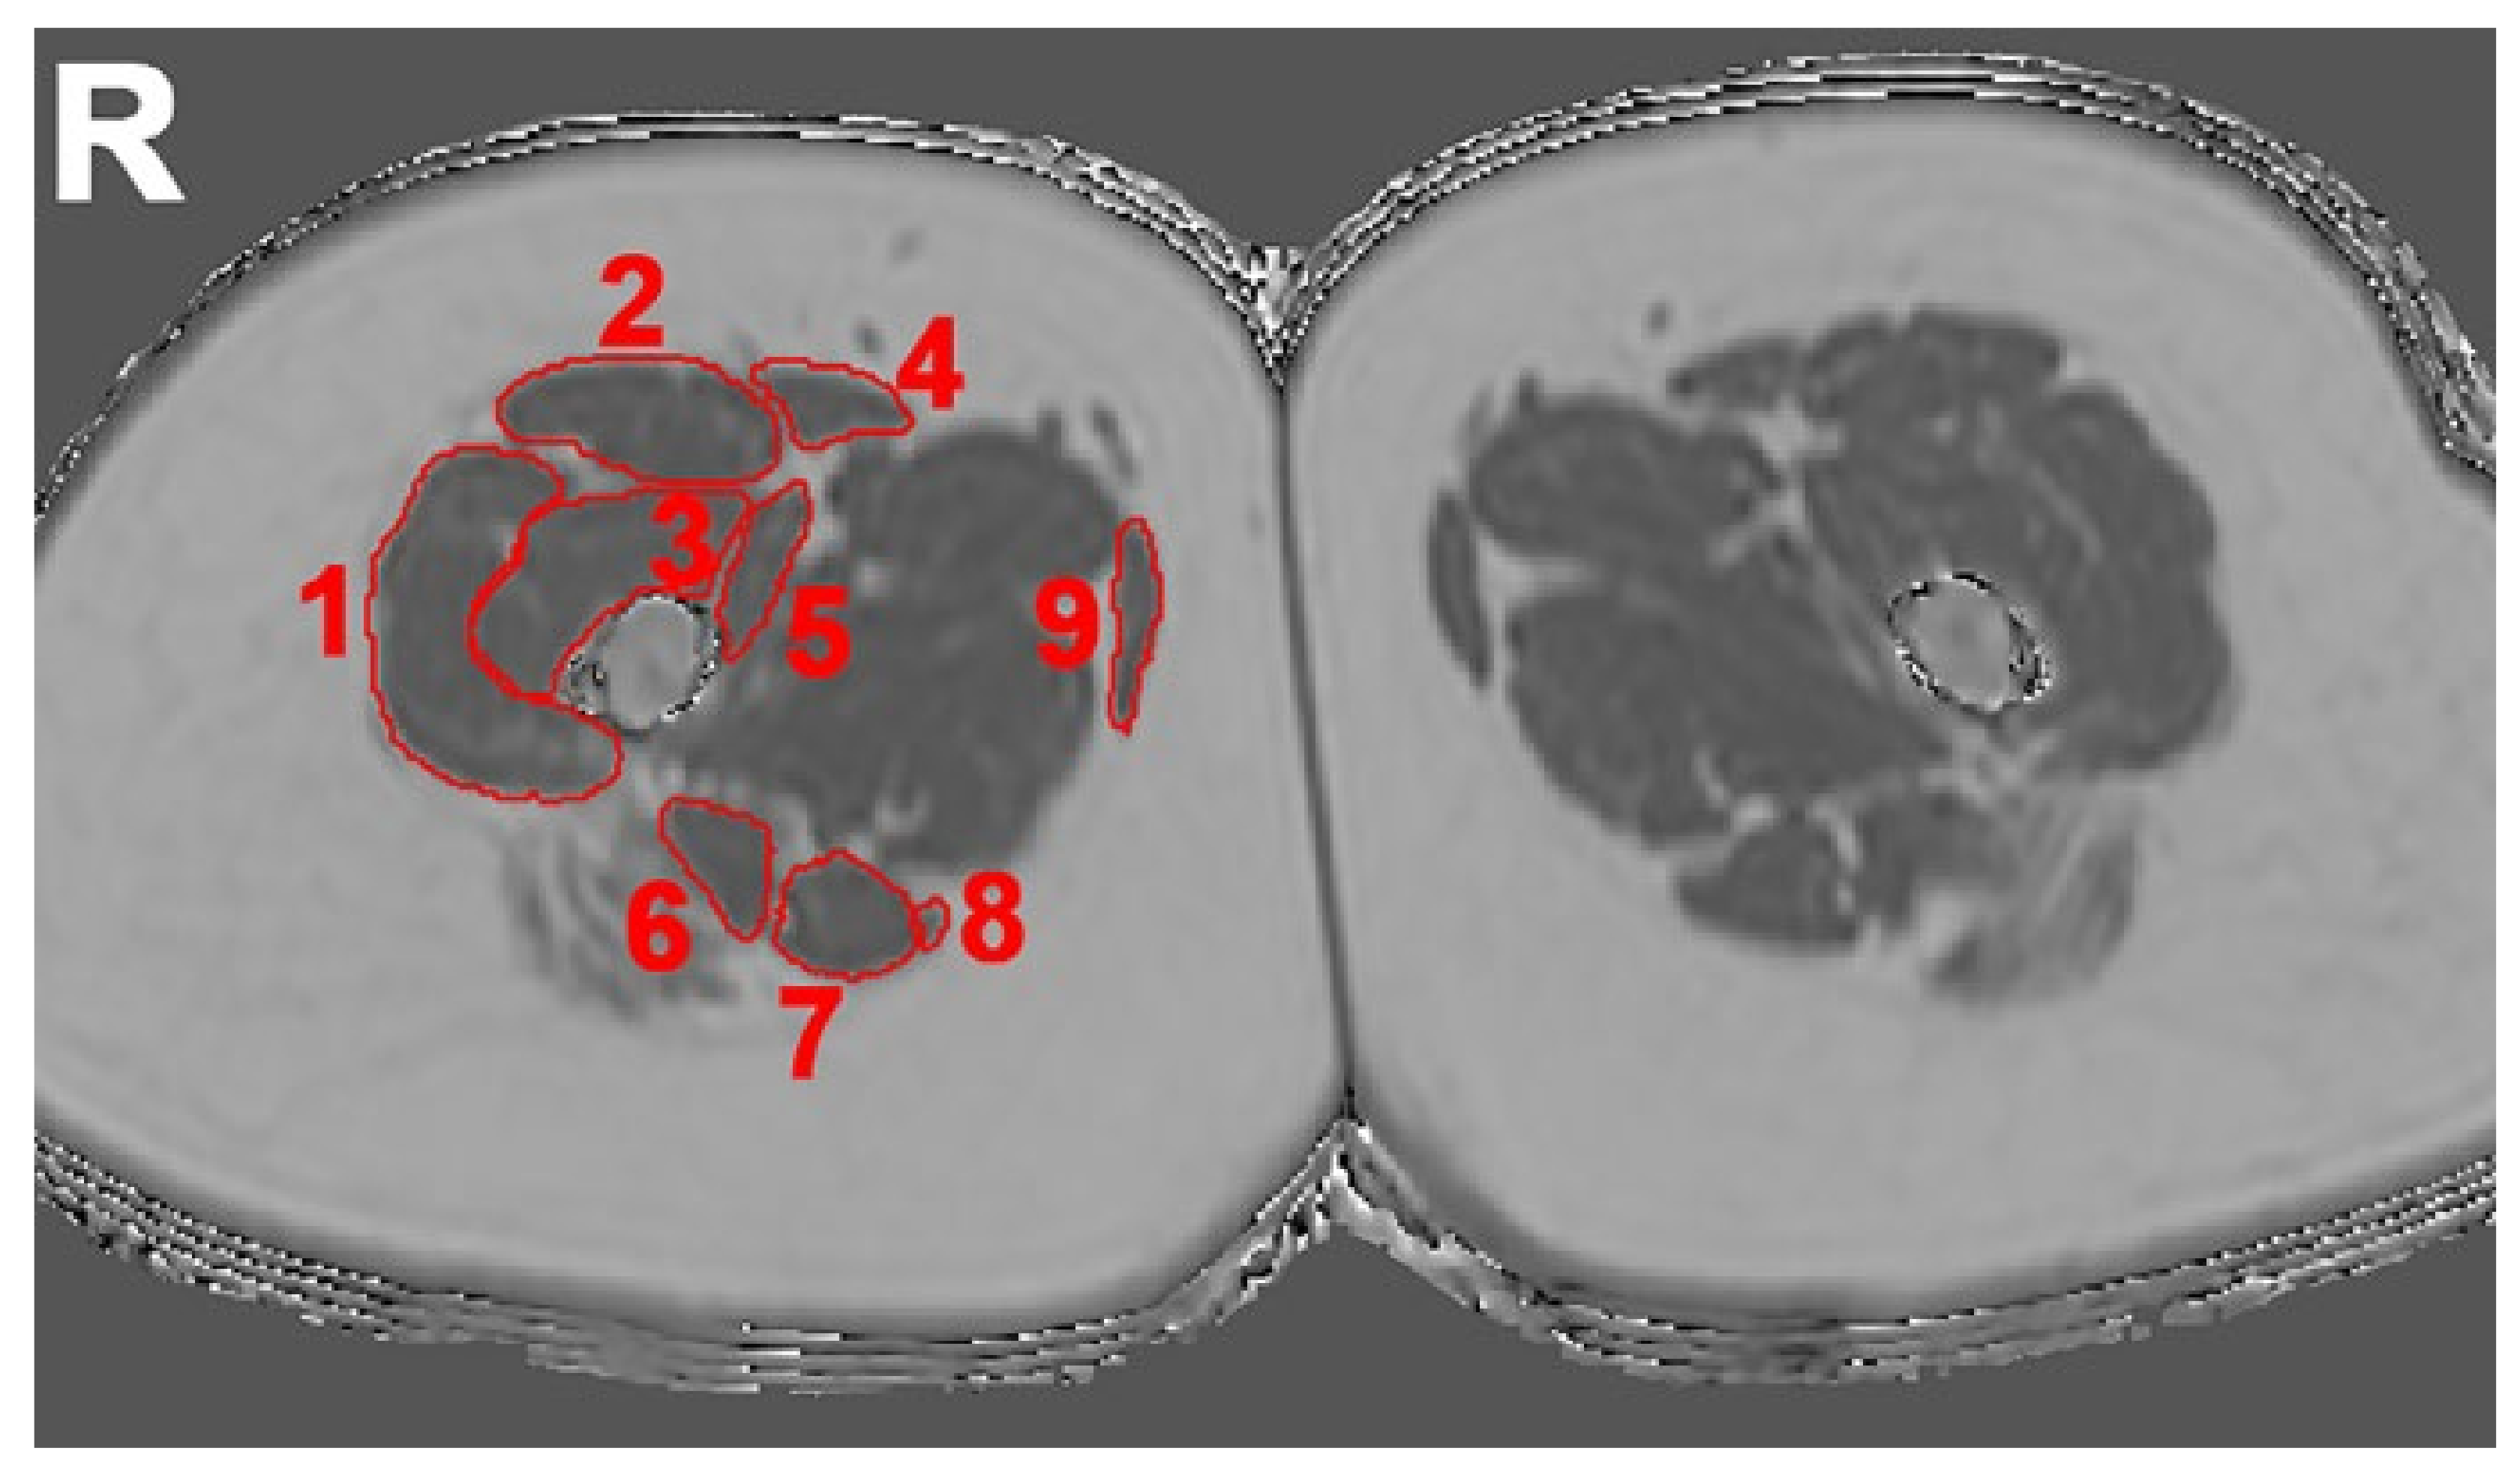 Diagnostics | Free Full-Text | Quantitative Muscle MRI in Patients with Neuromuscular Diseases—Association of Muscle Proton Density Fat Fraction with Semi-Quantitative Grading of Fatty Infiltration and Muscle Strength at the Region